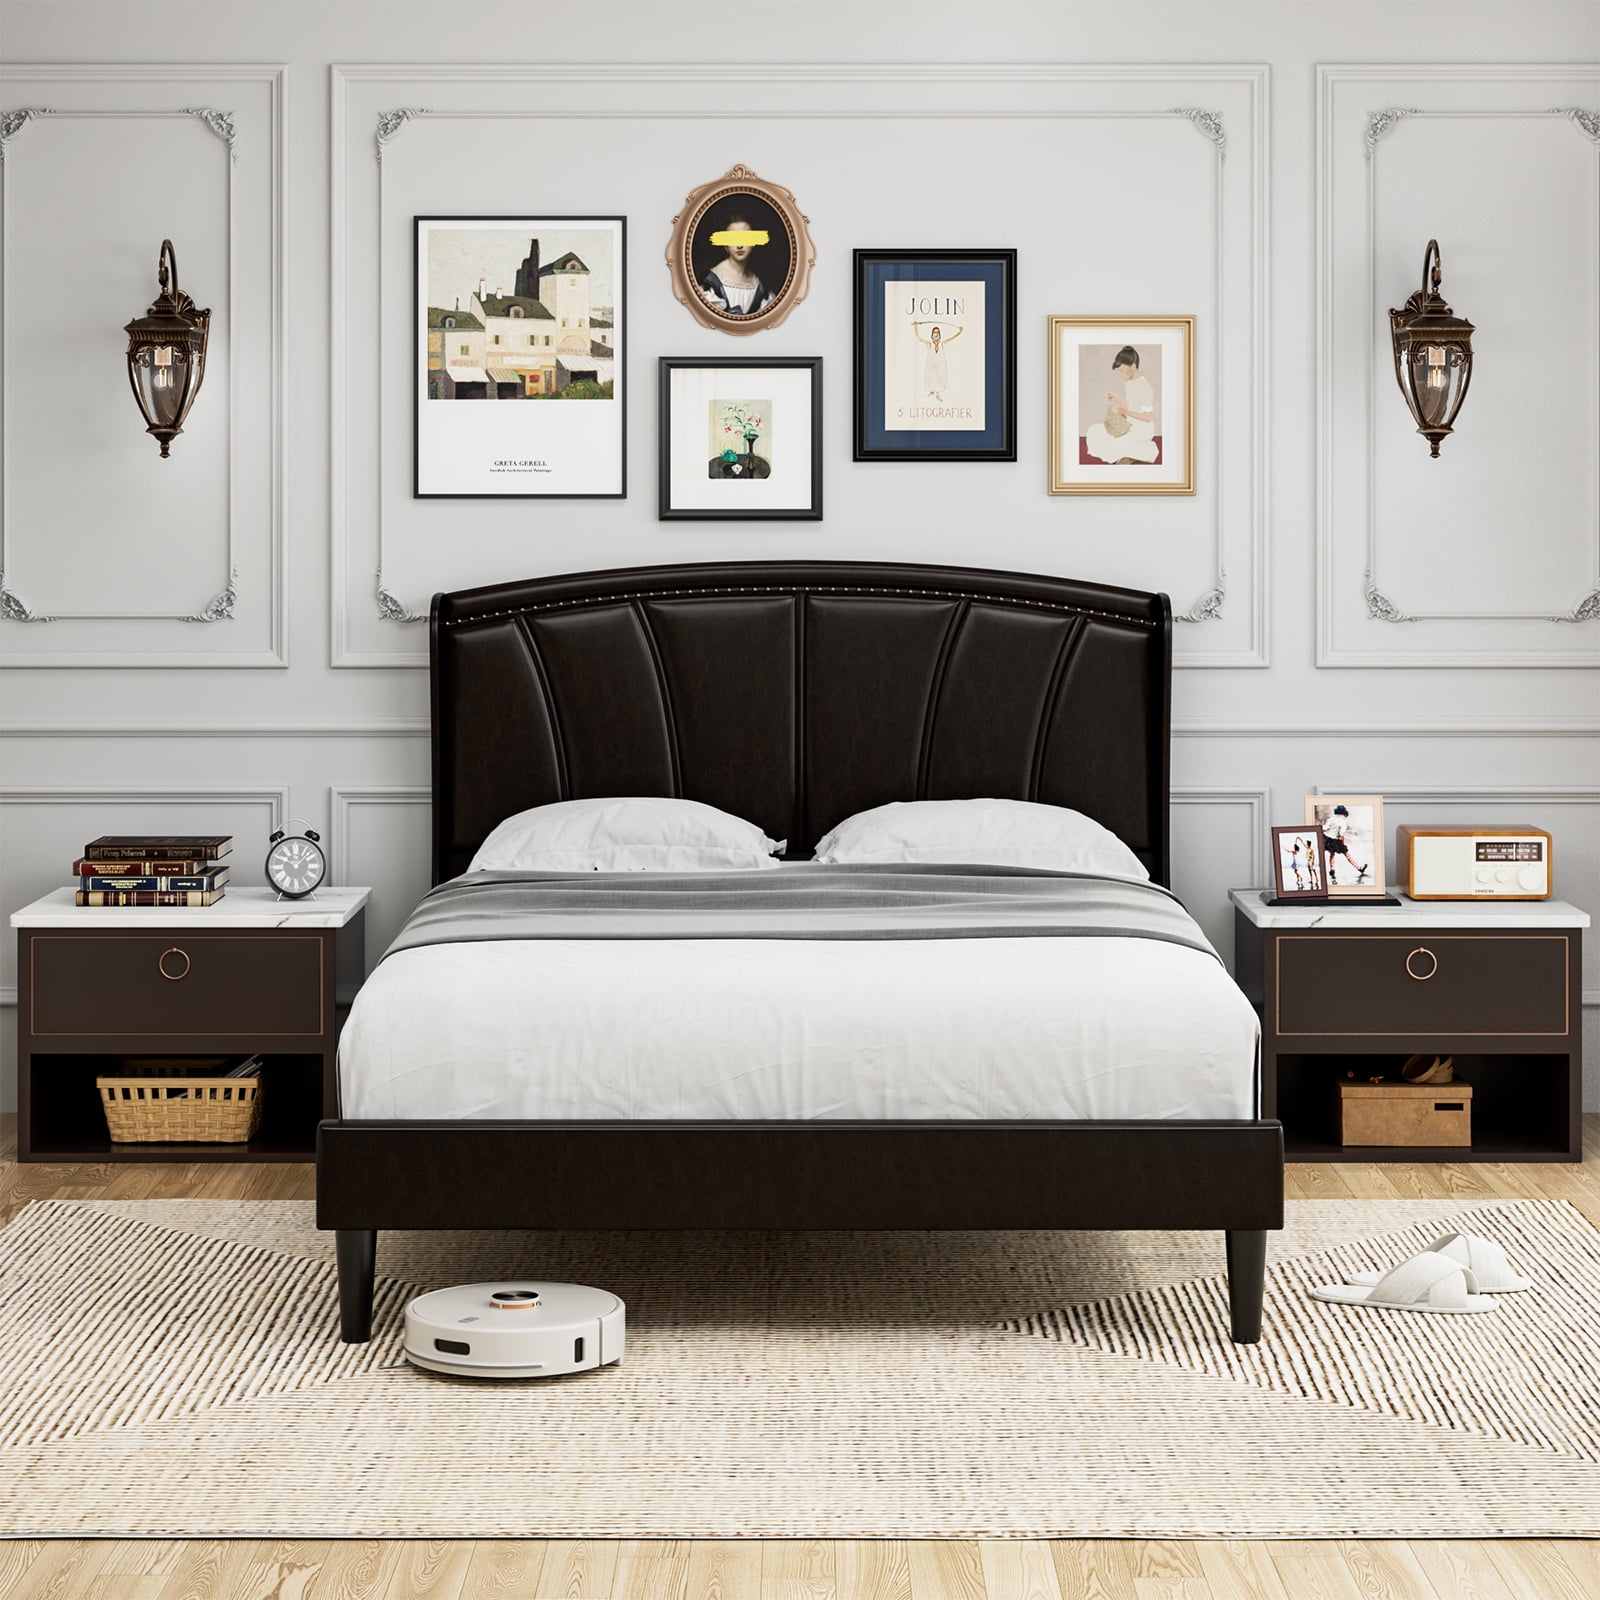 Homfa Queen Size Platform Bed Frame, PU Faux Leather Scallop Shape ...